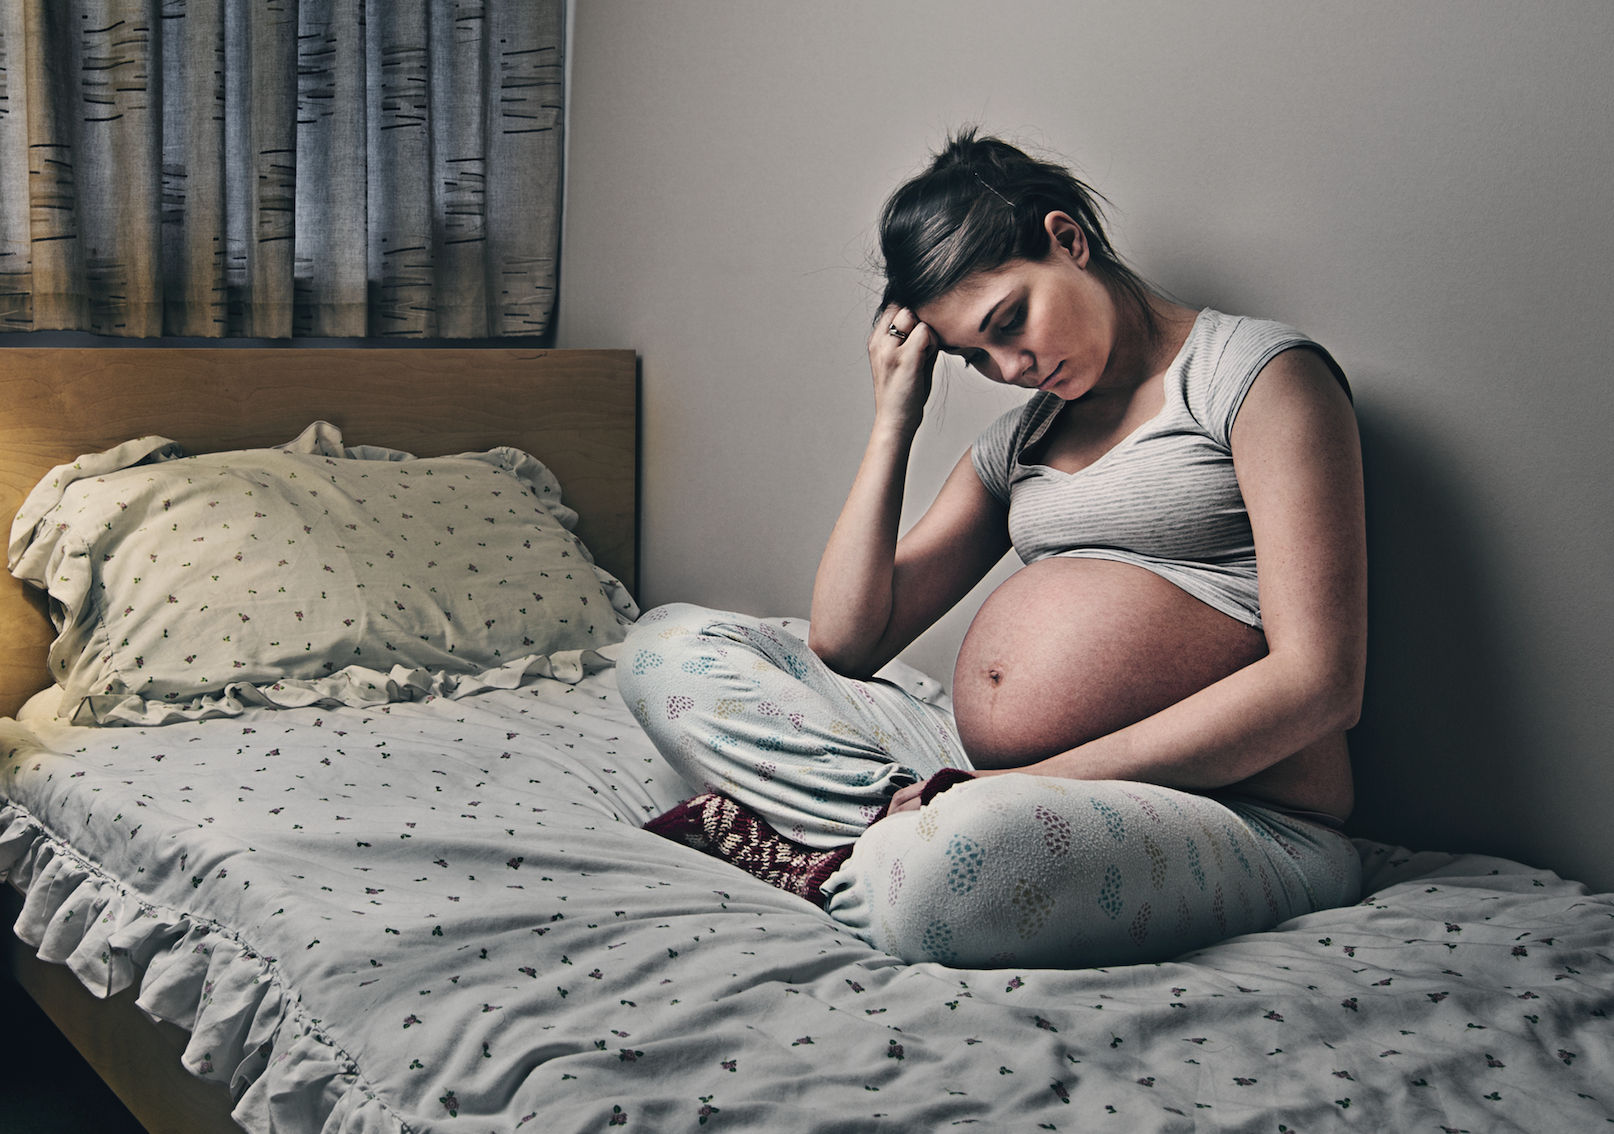 Young woman who is pregnant sitting alone in bed